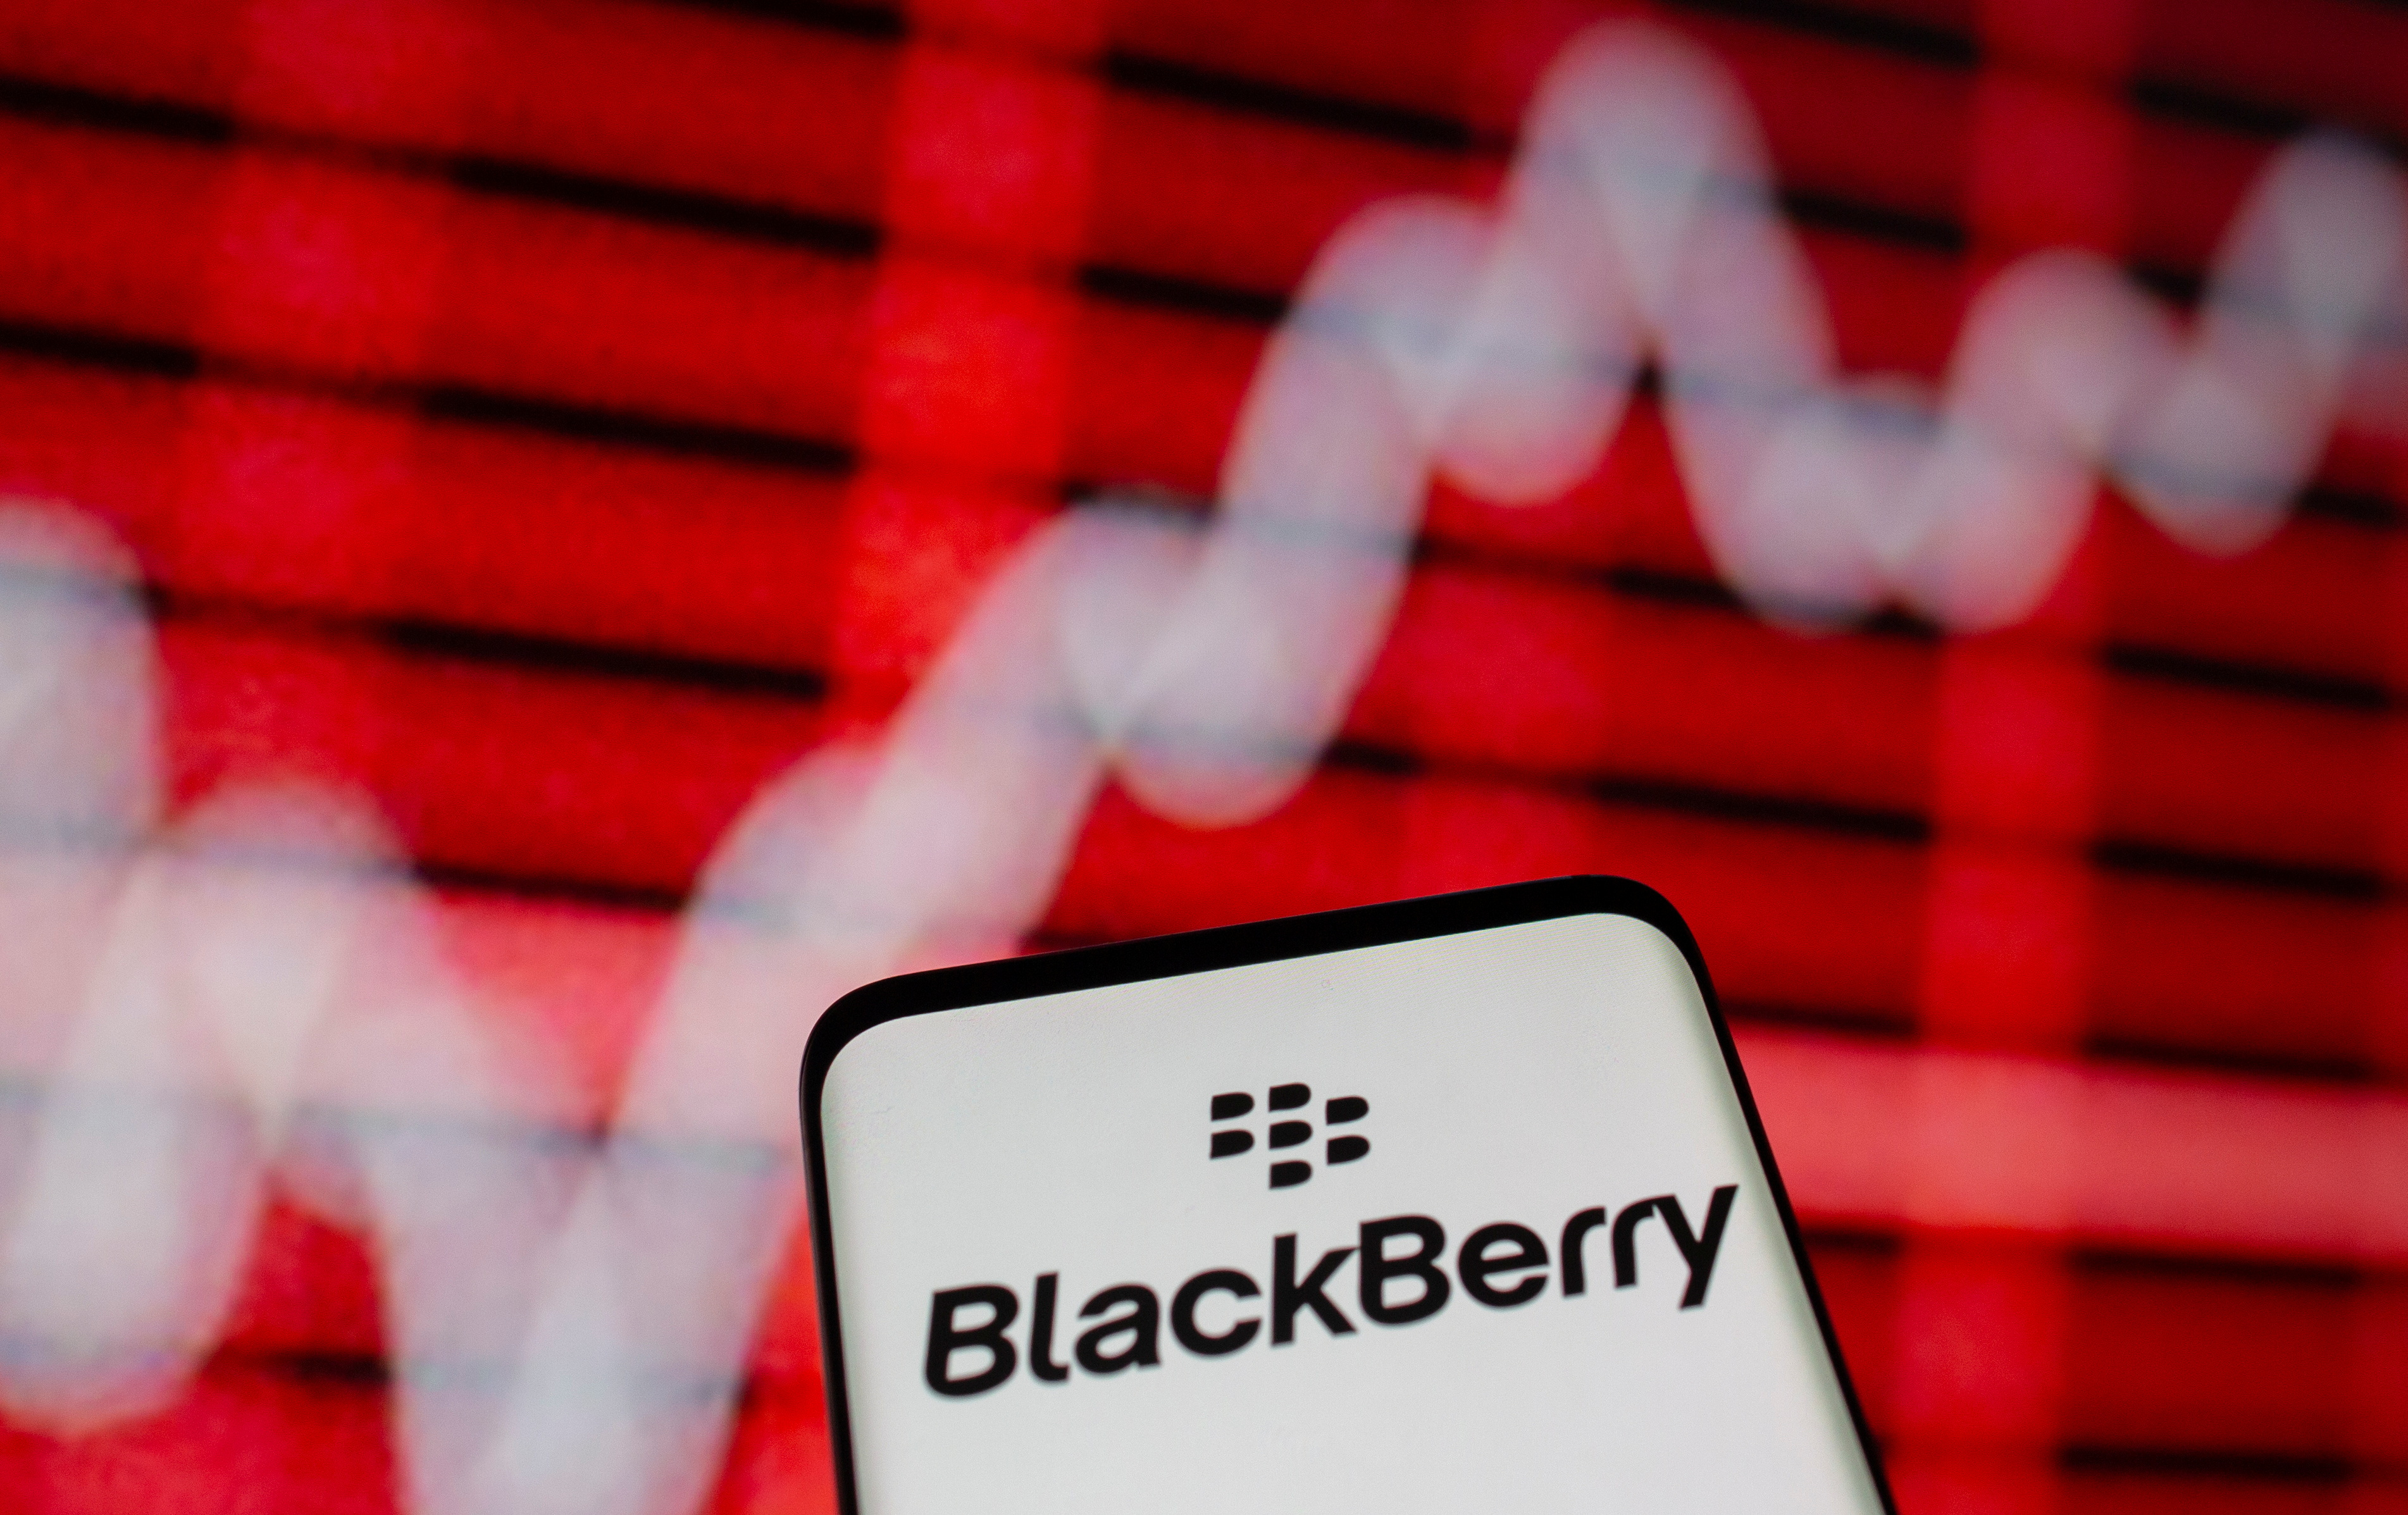 The Blackberry logo is seen on a smarphone in front of a displayed stock graph in this illustration